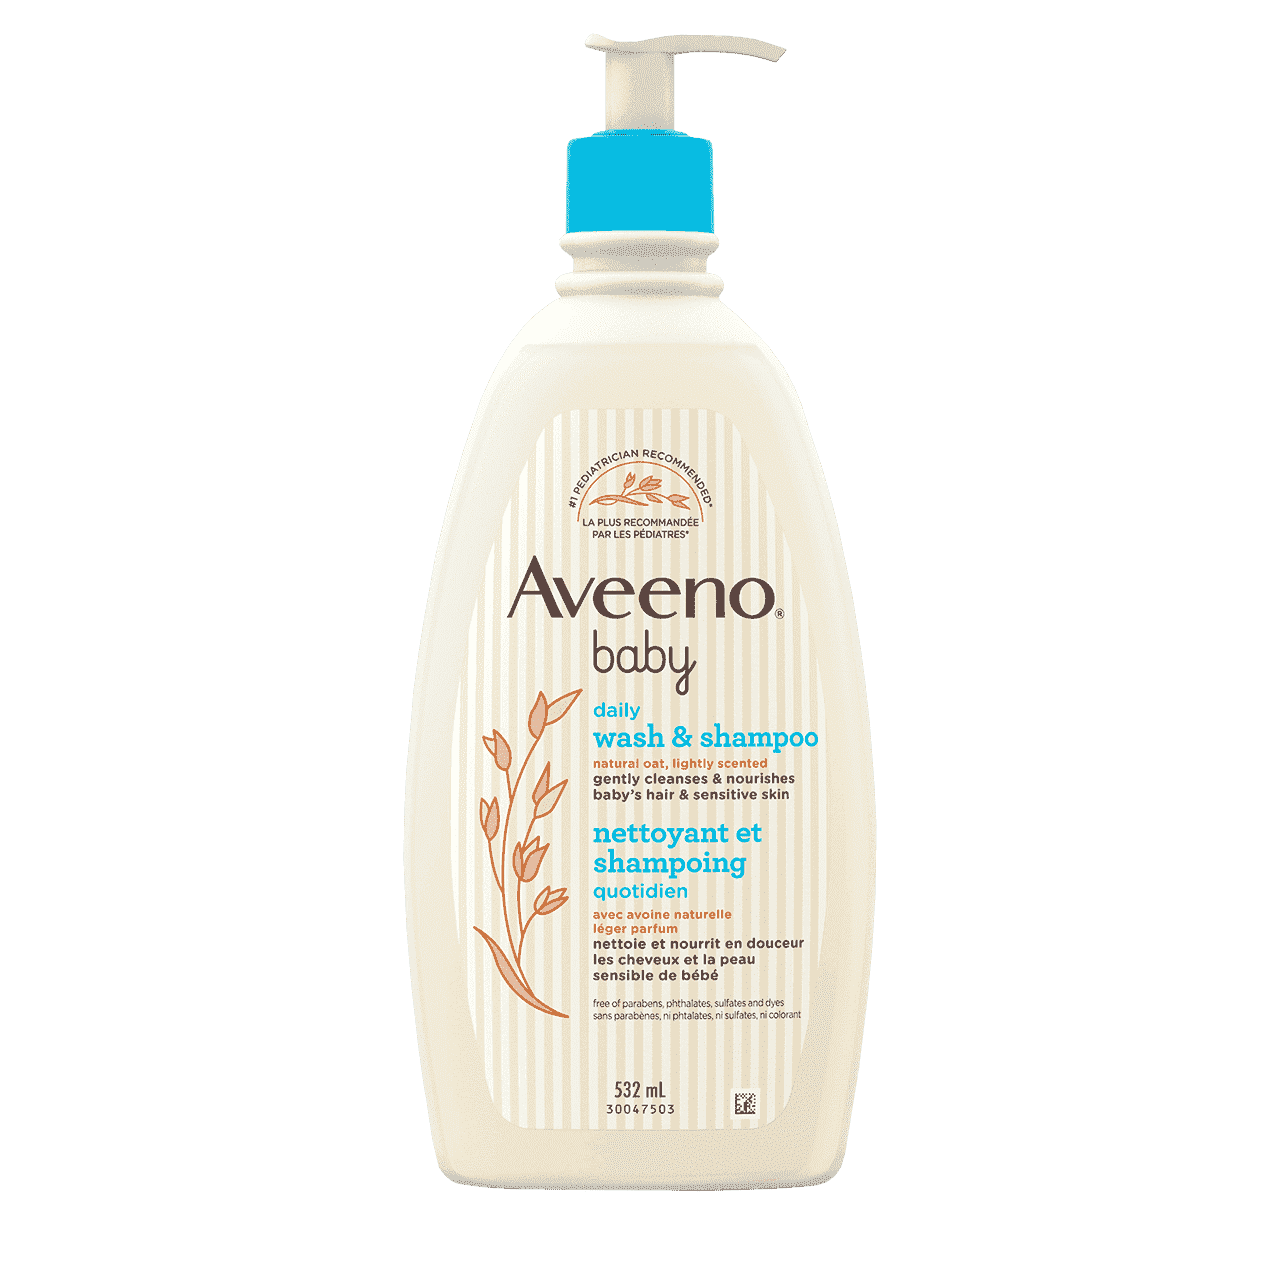 AVEENO® BABY Wash & Shampoo with natural Oat Extract, 532ml bottle